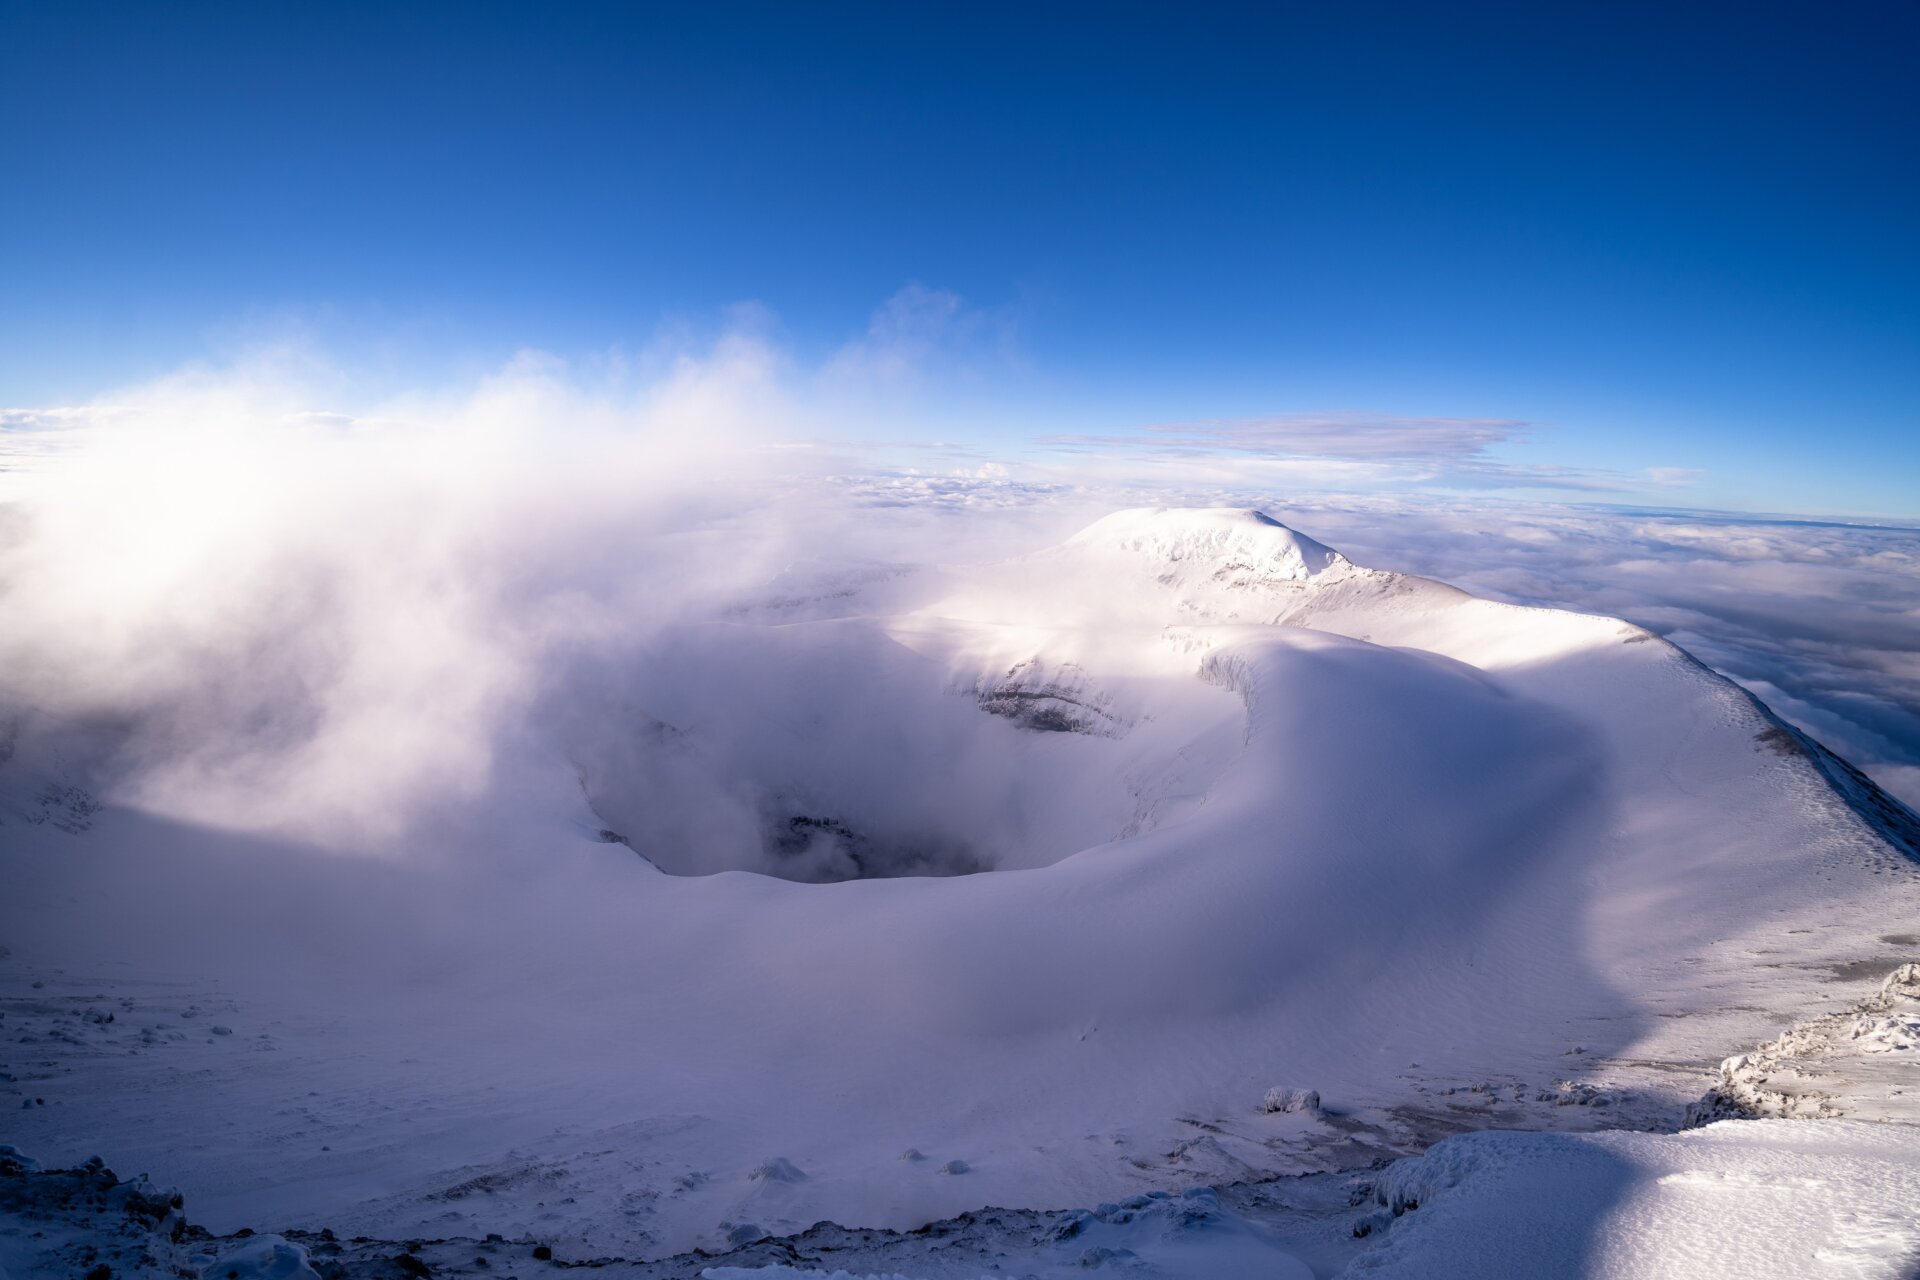 A view from the summit of Cotopaxi into the mouth of the volcano during a Cotopaxi Expedition with Alpenglow Expeditions.